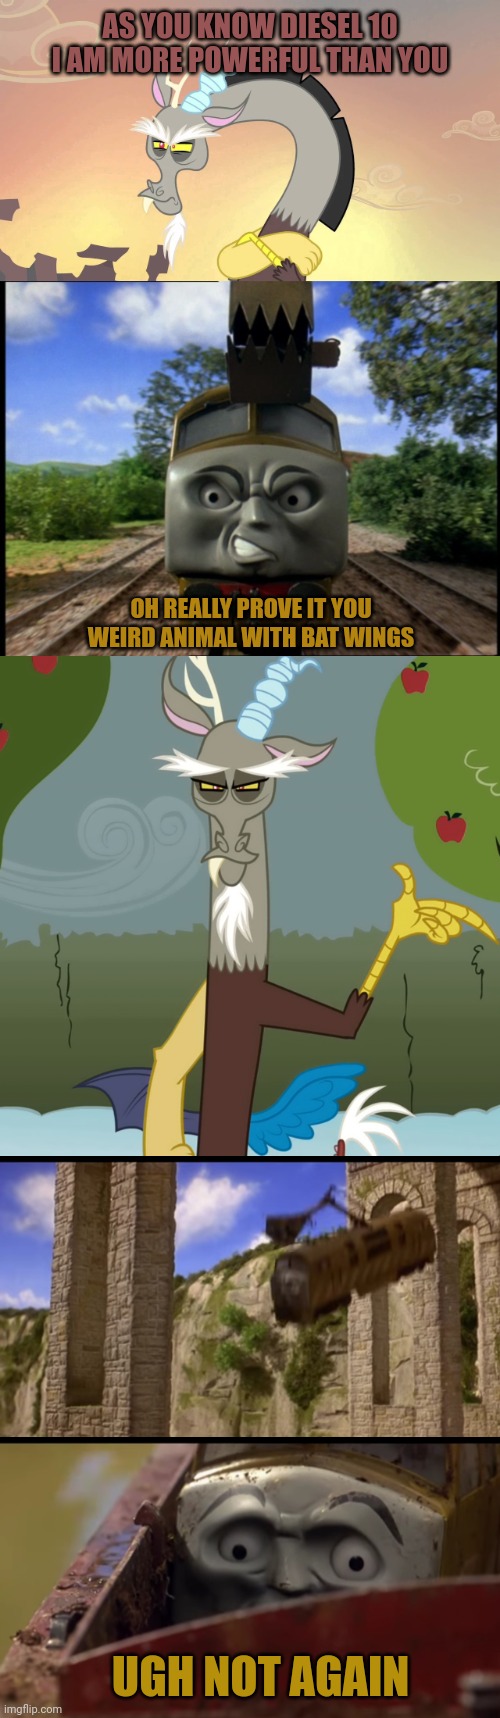 Diesel 10 Vs Discord | AS YOU KNOW DIESEL 10 I AM MORE POWERFUL THAN YOU; OH REALLY PROVE IT YOU WEIRD ANIMAL WITH BAT WINGS; UGH NOT AGAIN | image tagged in discord,mlp,my little pony,diesel 10,memes,thomas and friends | made w/ Imgflip meme maker